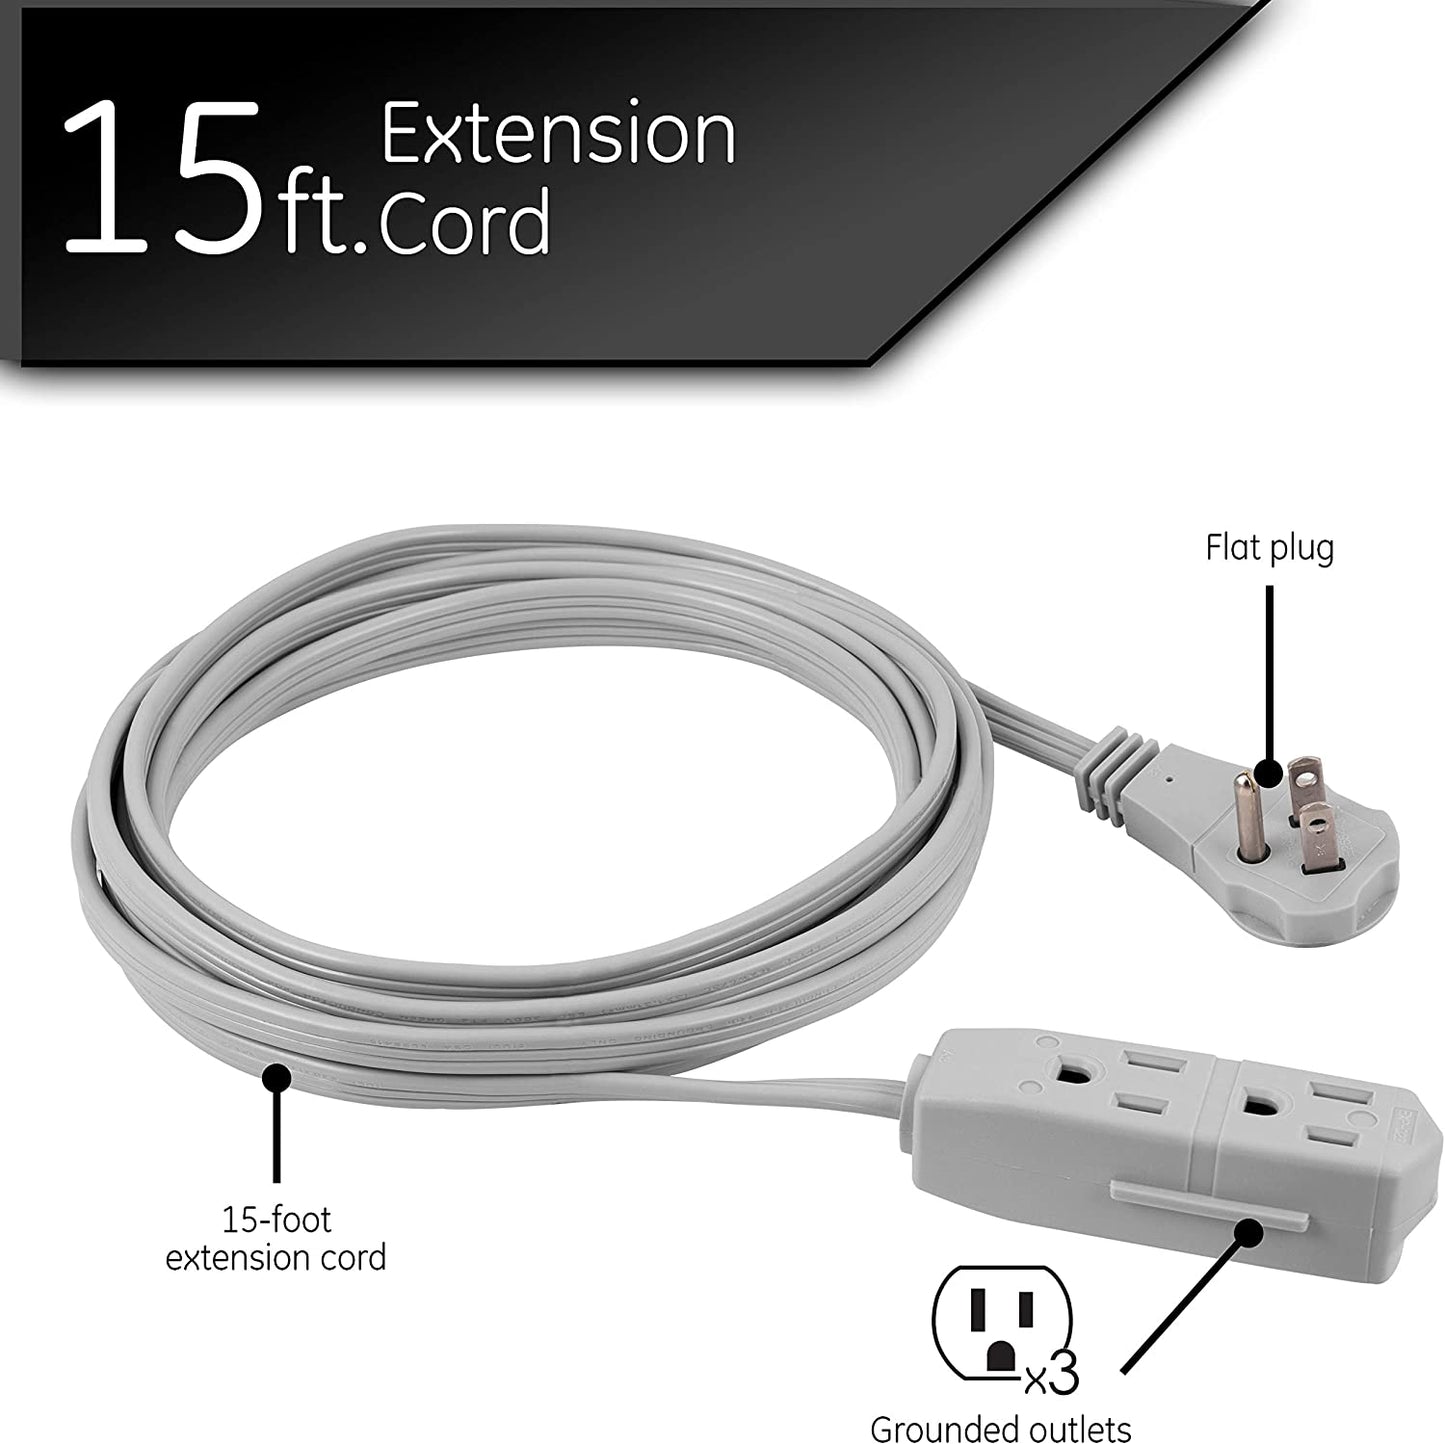 15 Ft Power Cable Indoor Extension Cord with 3 Grounded Outlets, UL Listed - 1 Pack, Gray 